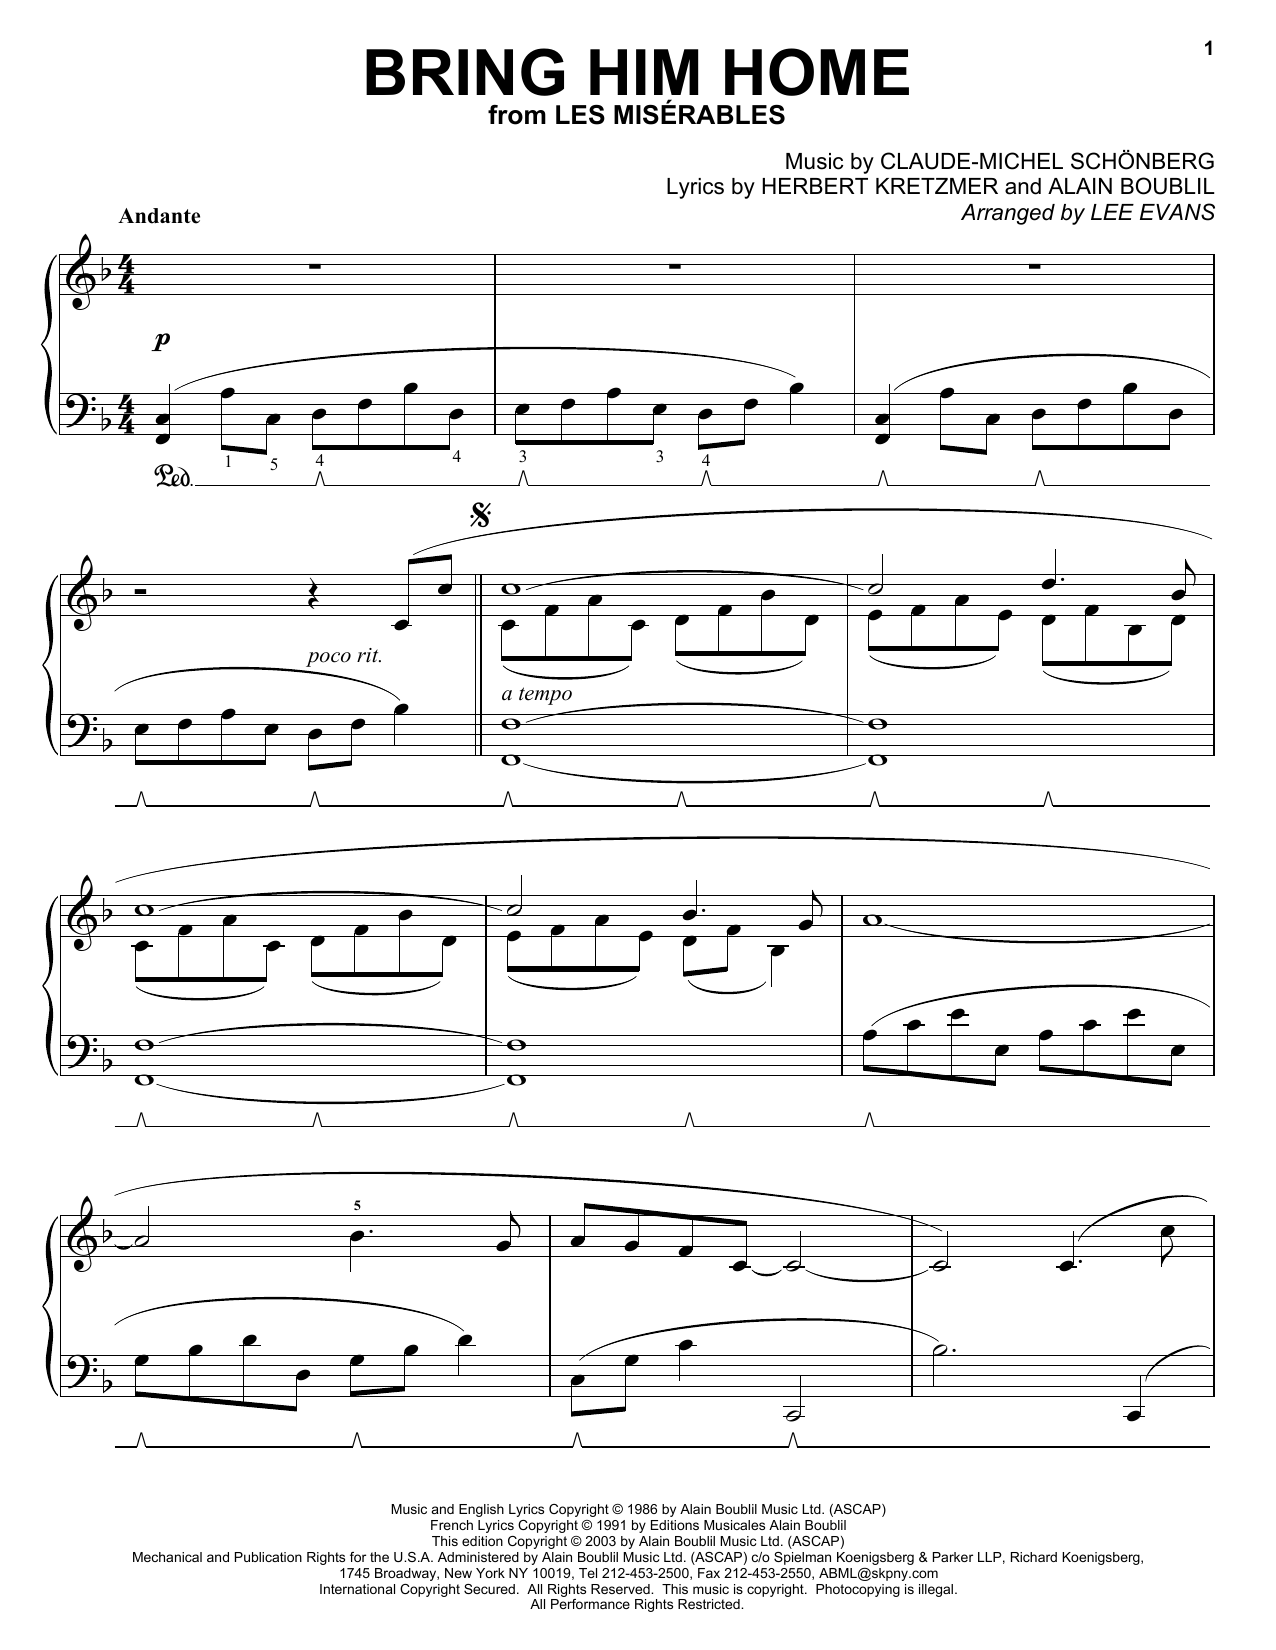 Download Alain Boublil Bring Him Home (from Les Miserables) Sheet Music